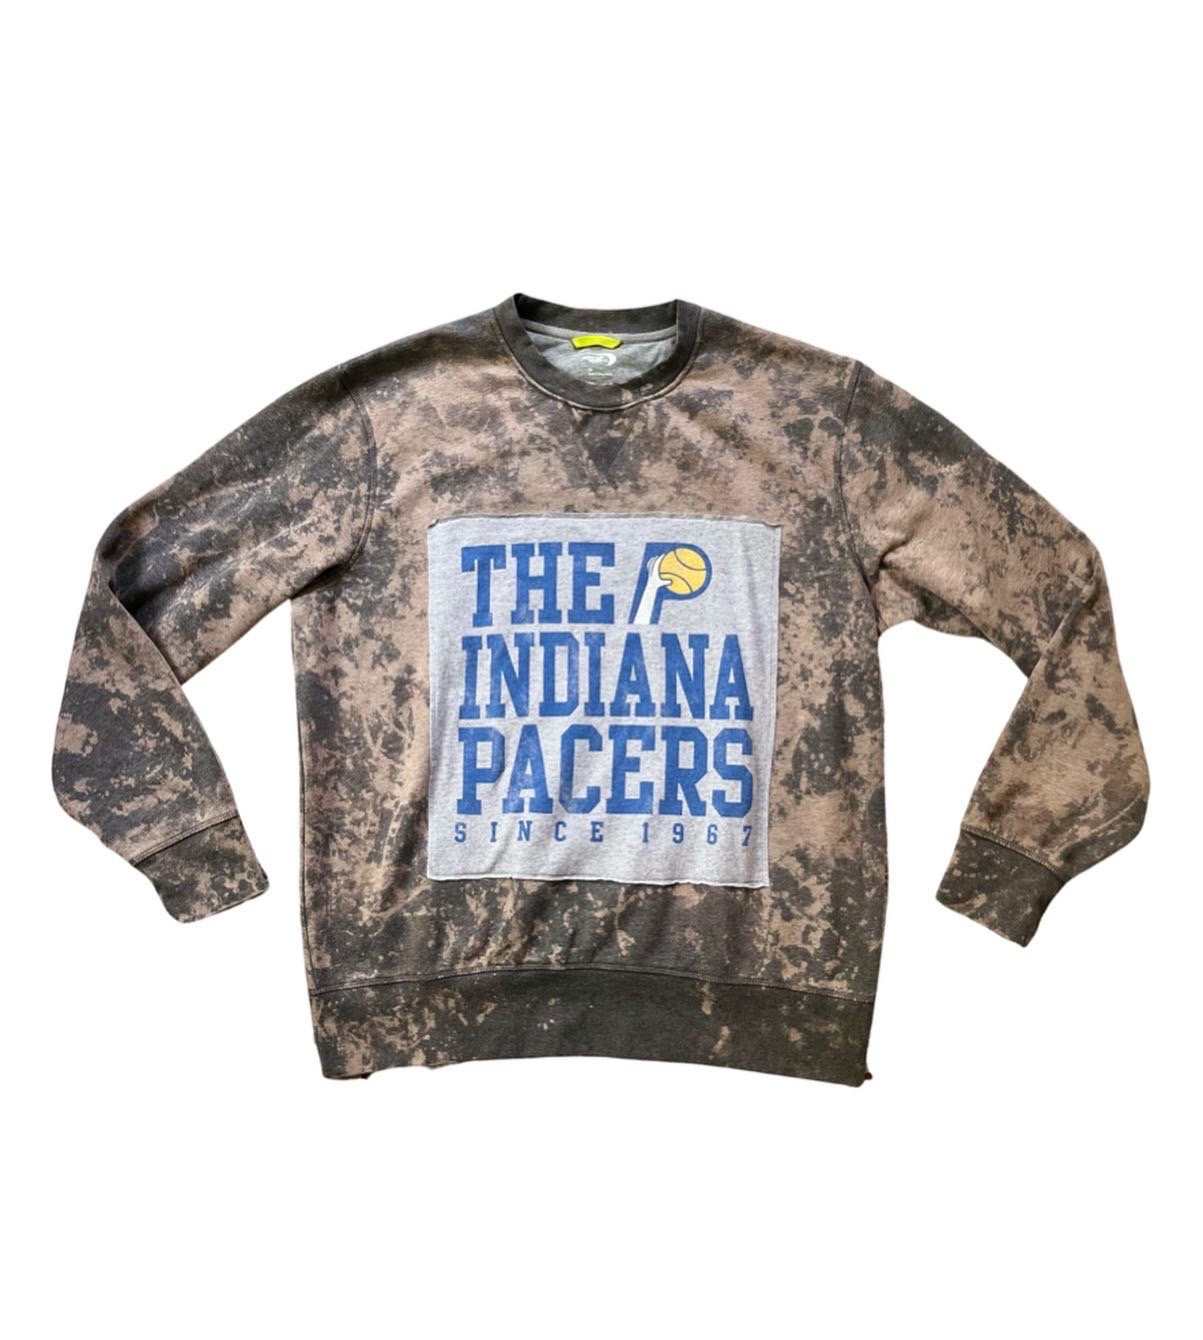 Indiana Pacers, One of a KIND Vintage Sweatshirt with Crystal Star Design